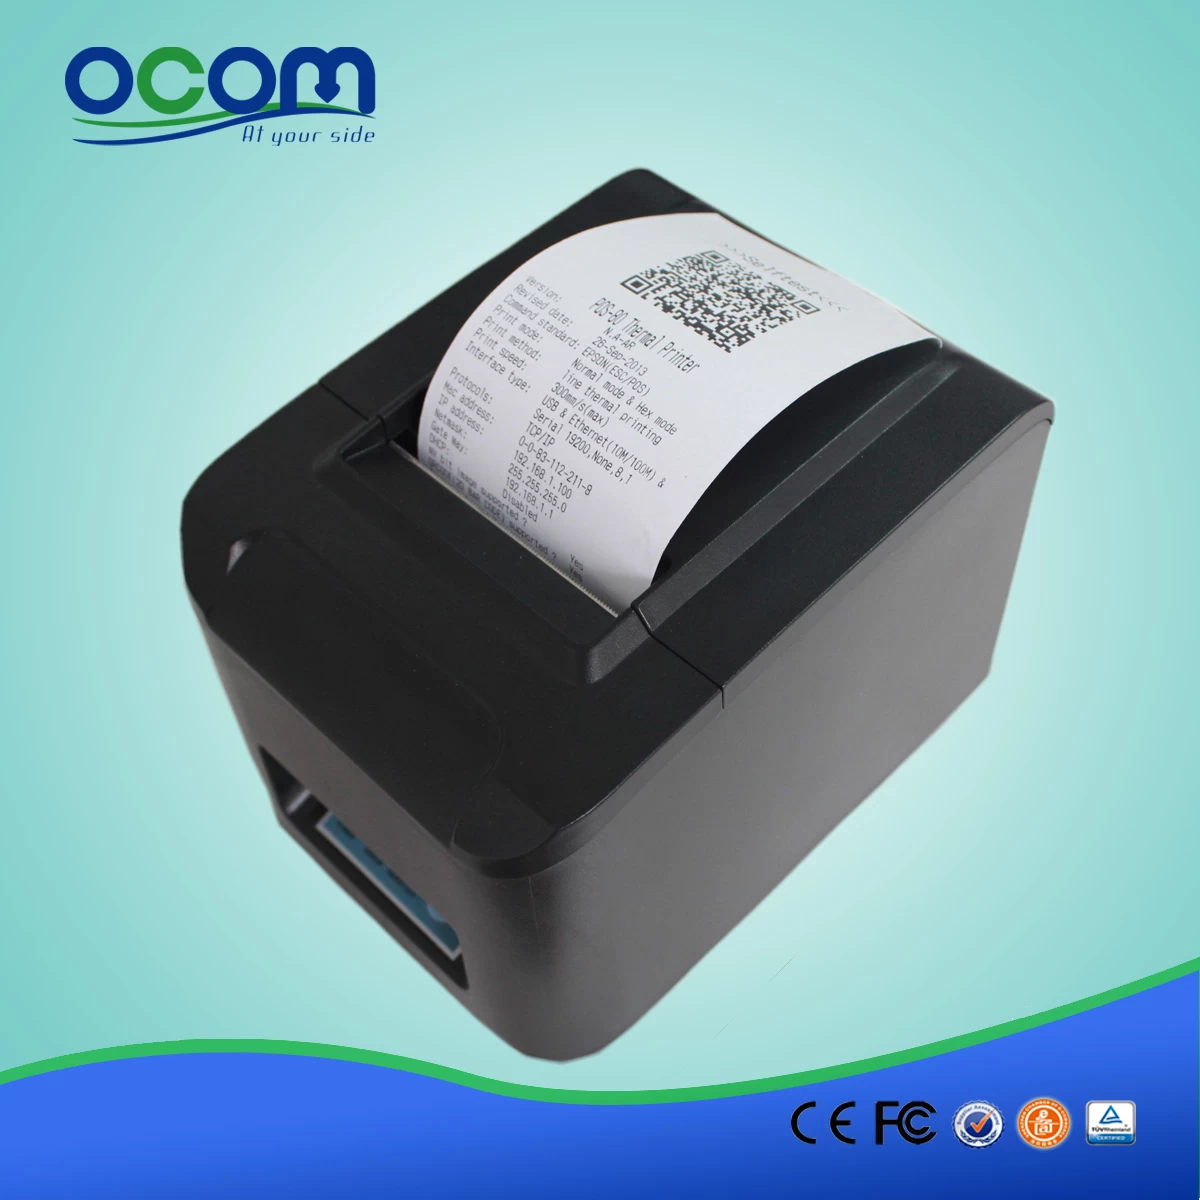 Auto cutter pos 80mm mobile thermal receipt printer